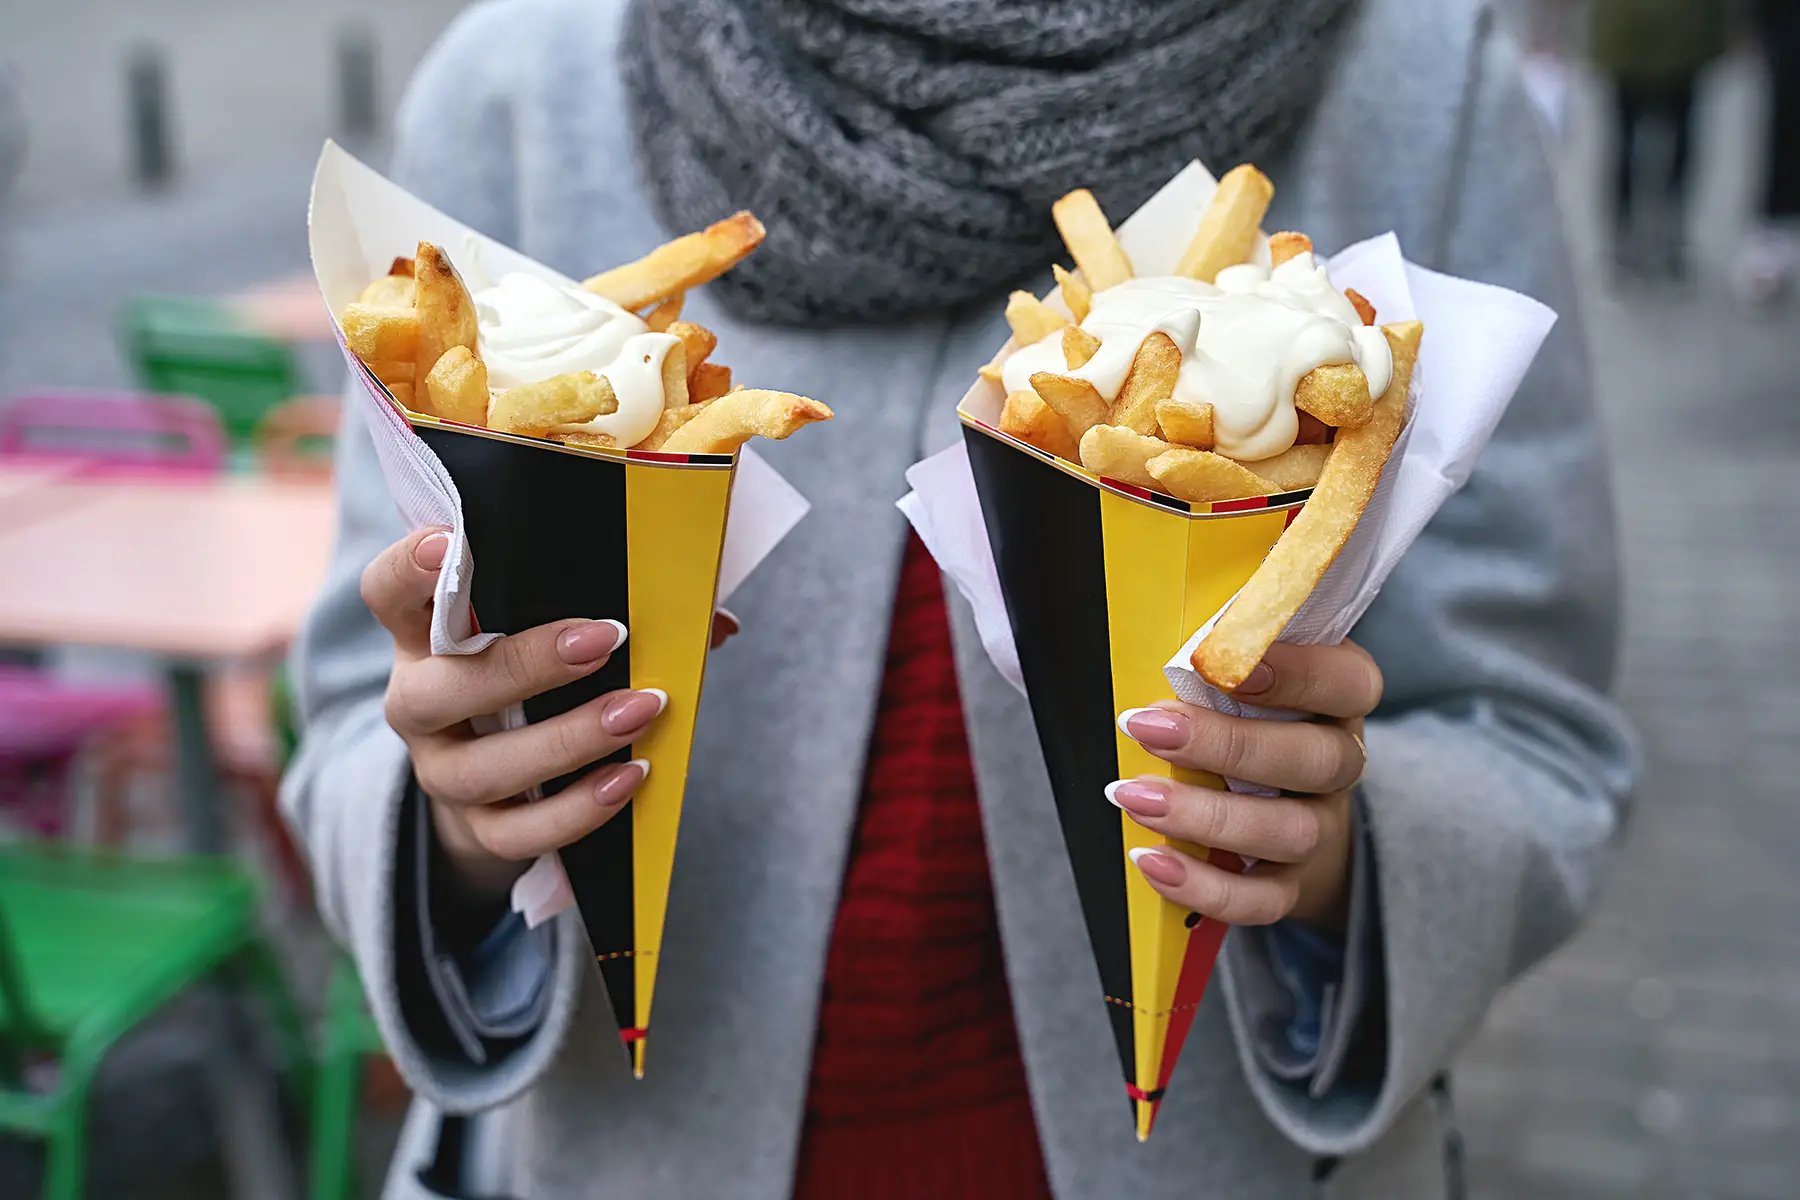 Woman holding two cones of Belgian fries